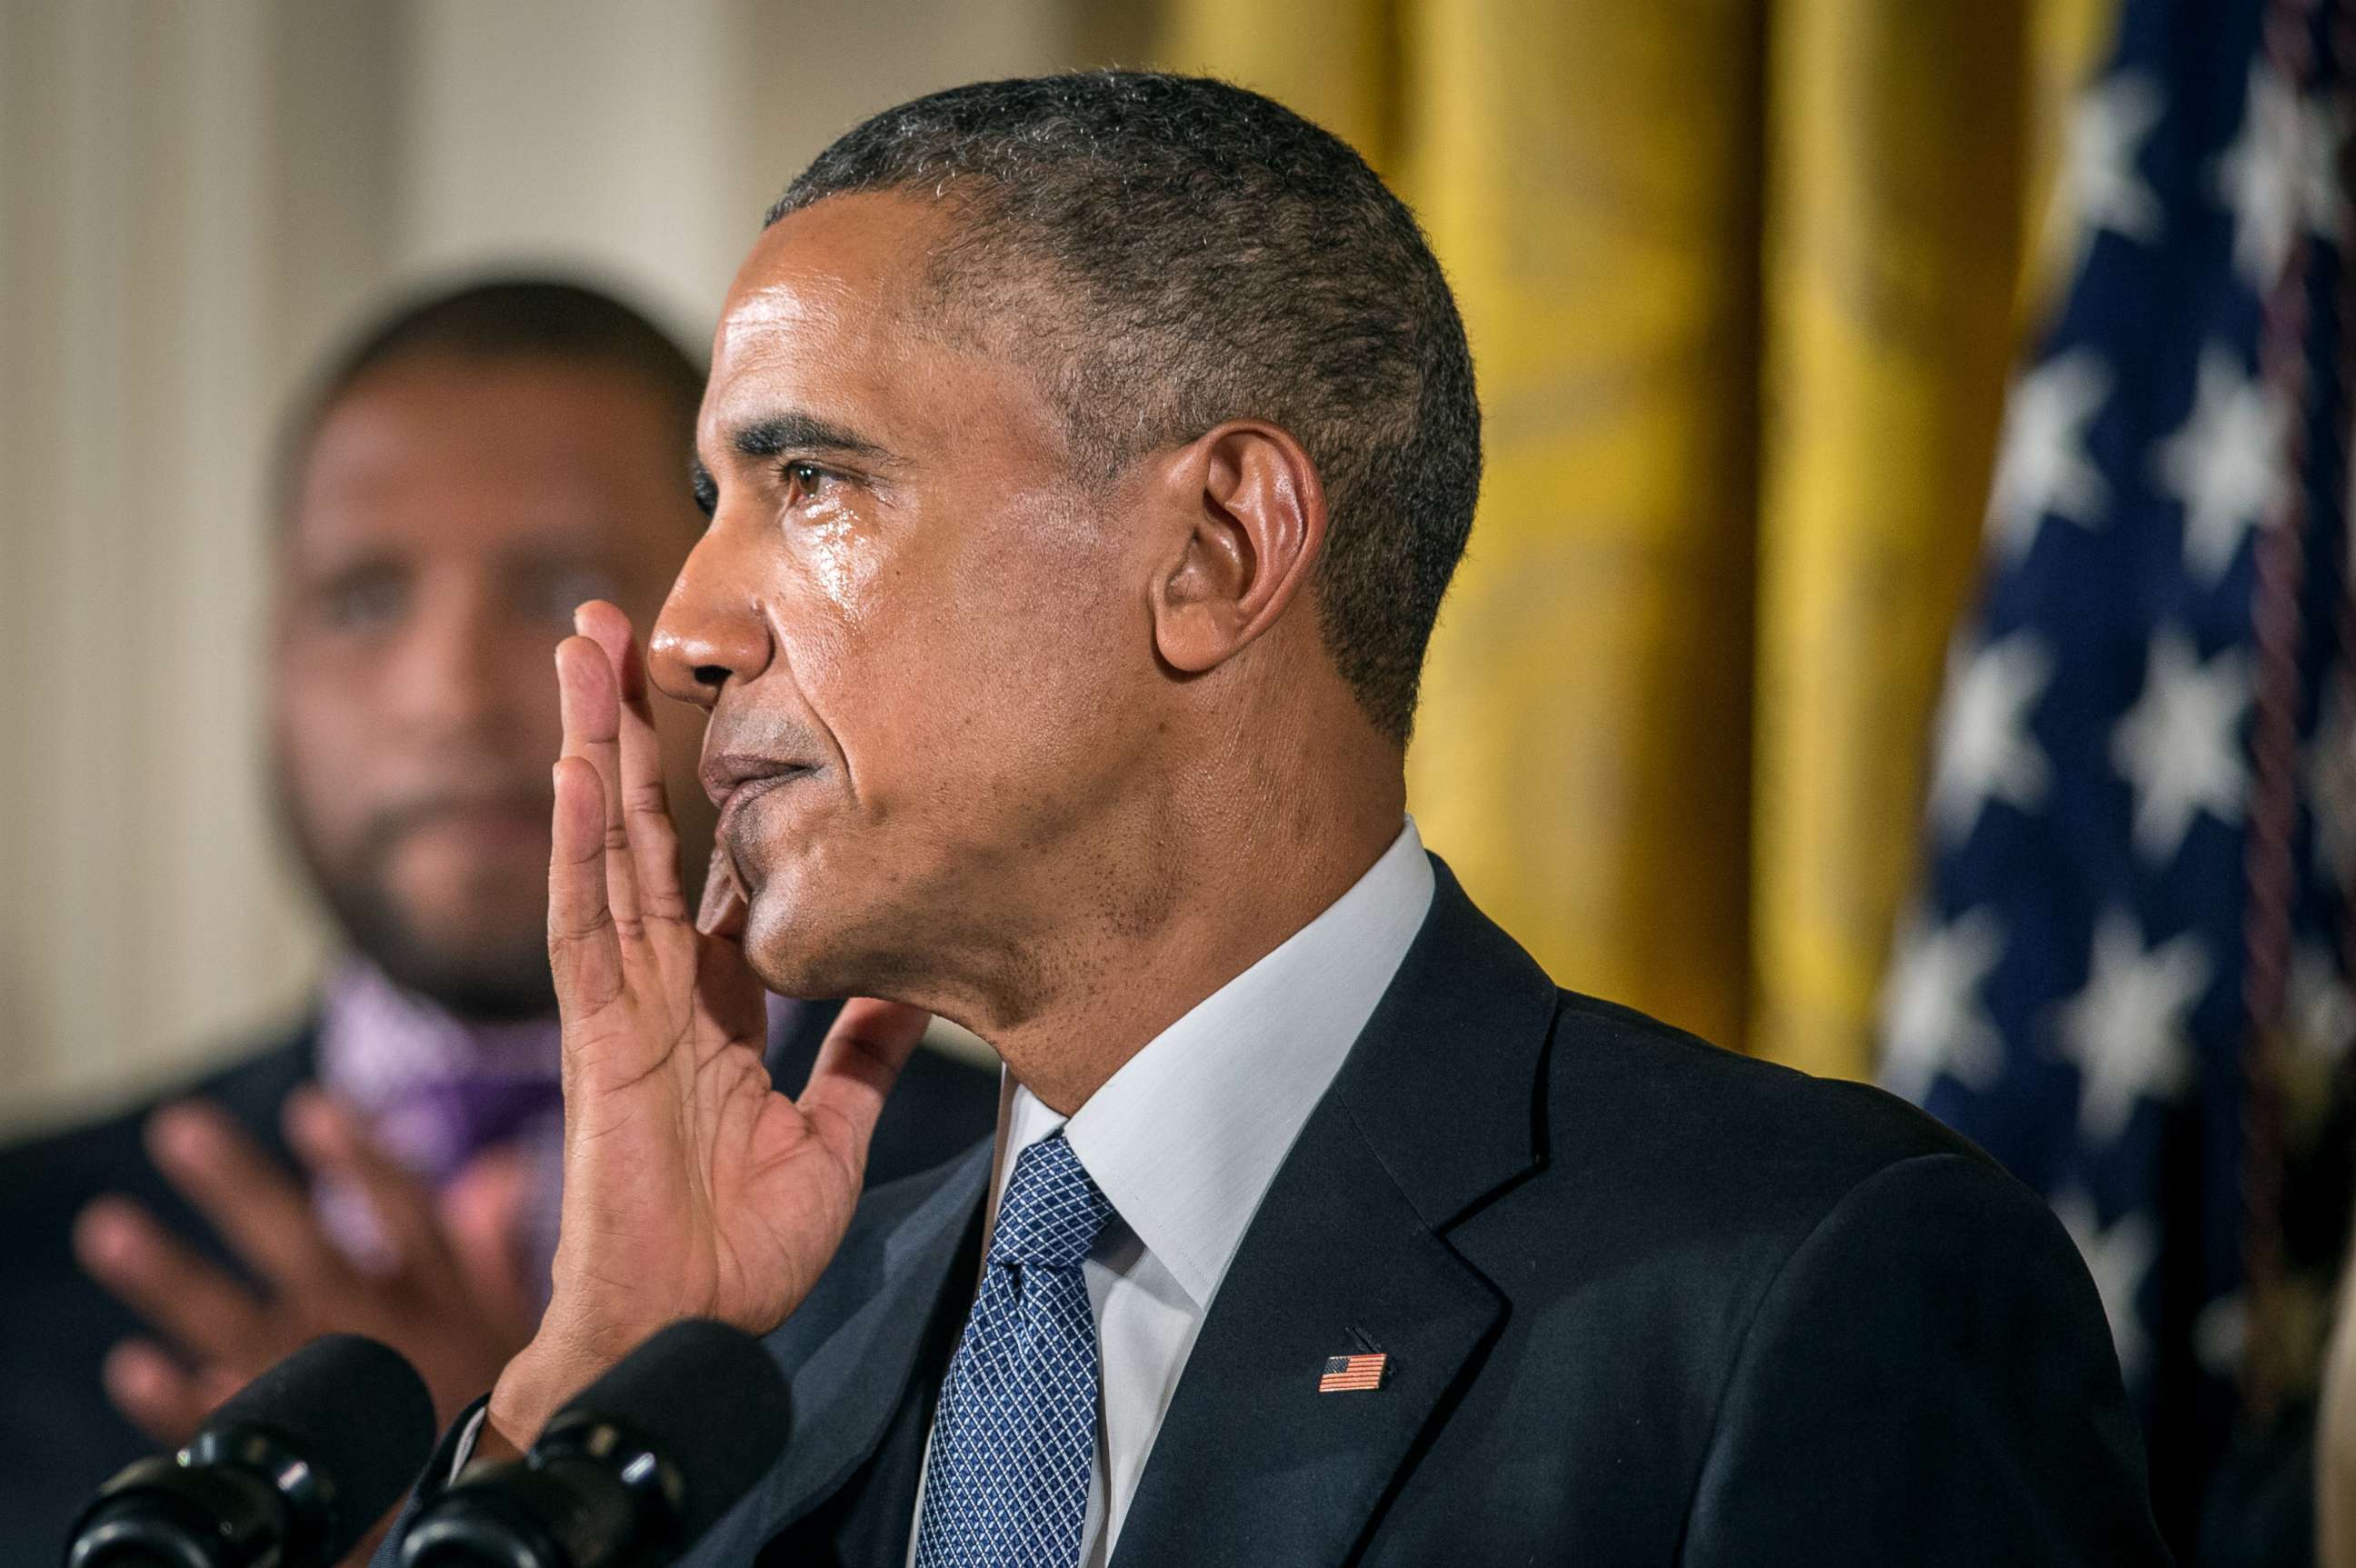 PHOTO: President Barack Obama wipes away tears as he talks about needless shootings at Sandy Hook Elementary school during a press briefing in the East Room of the White House, Jan. 5, 2015, in Washington D.C.